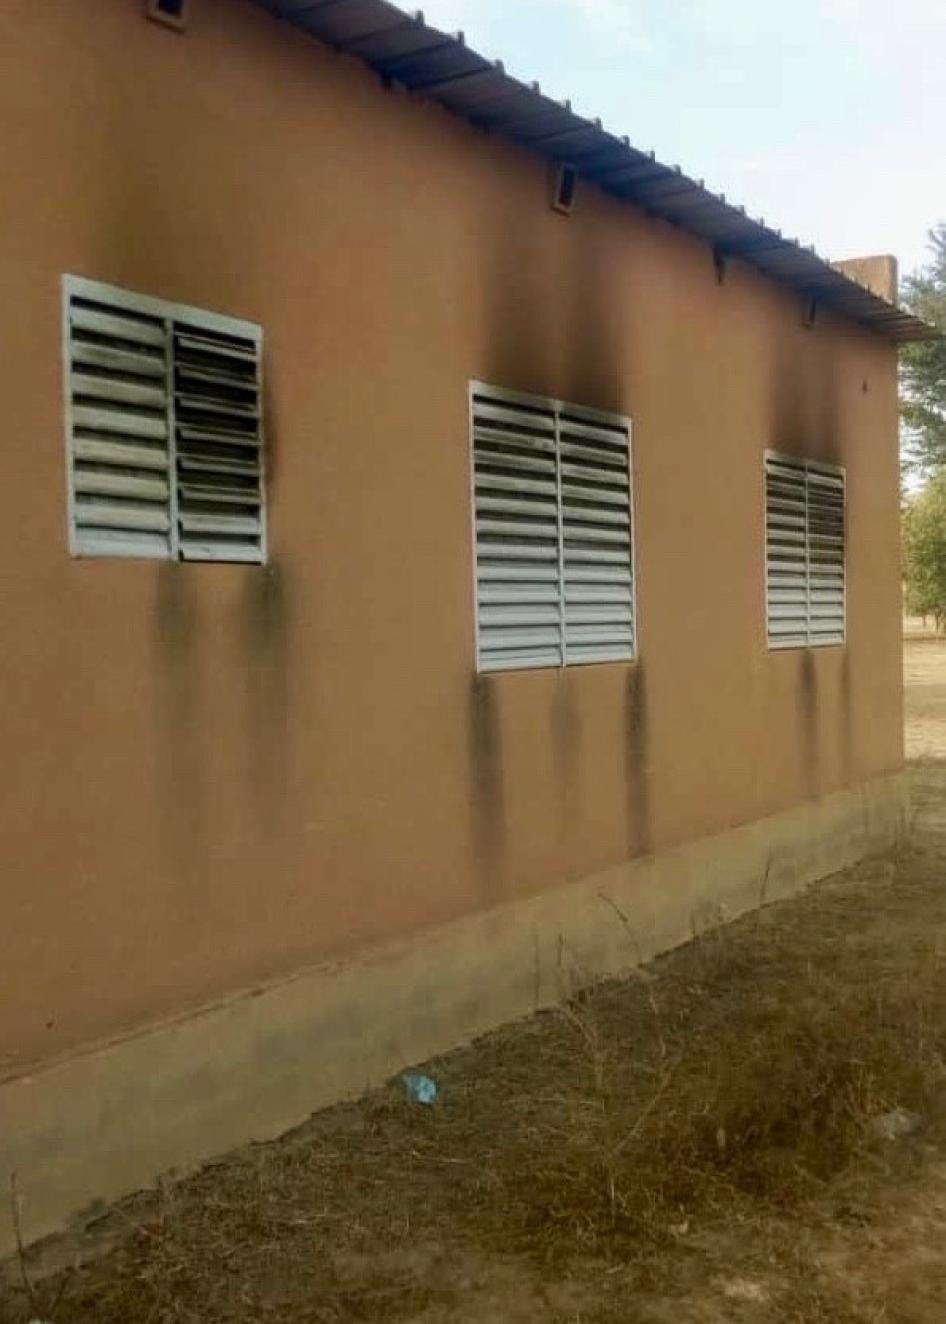 Burn marks on the side of a yellow building